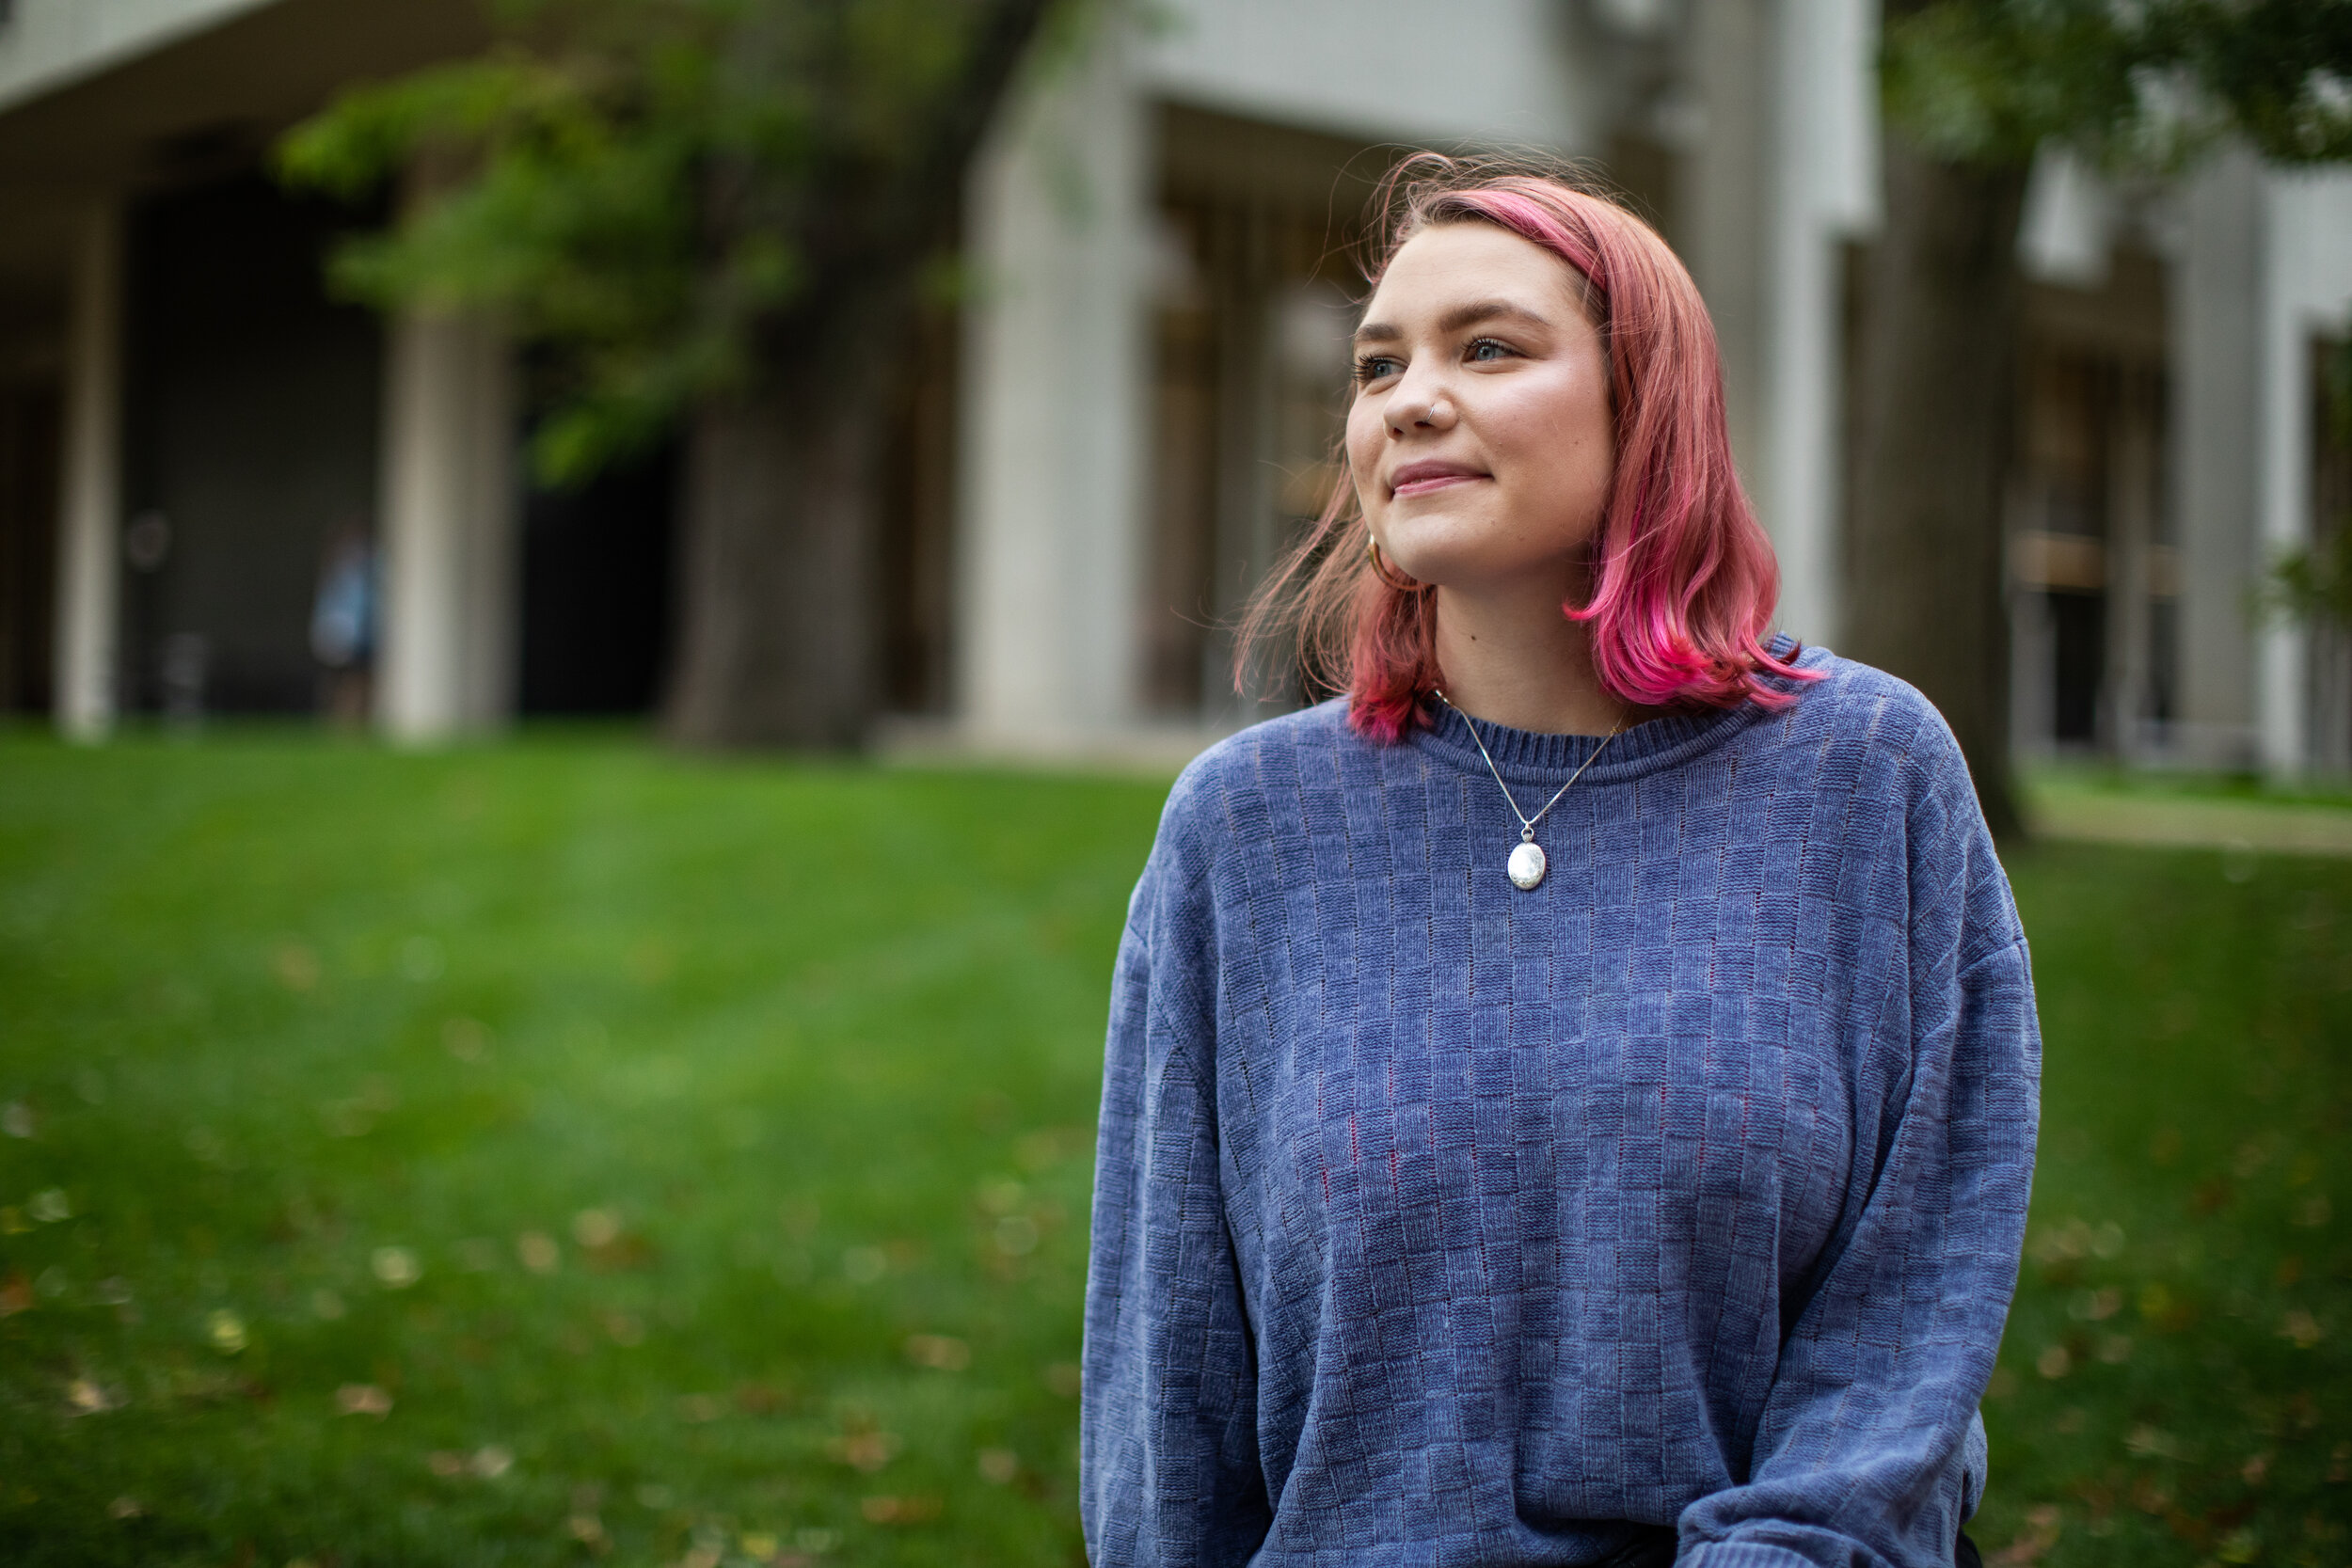   Leeannah McNew, a Temple University student, is one of the student leaders for the project Art for Change, which focuses on reducing stigma and bringing awareness about opioid use through creative expression and art.  